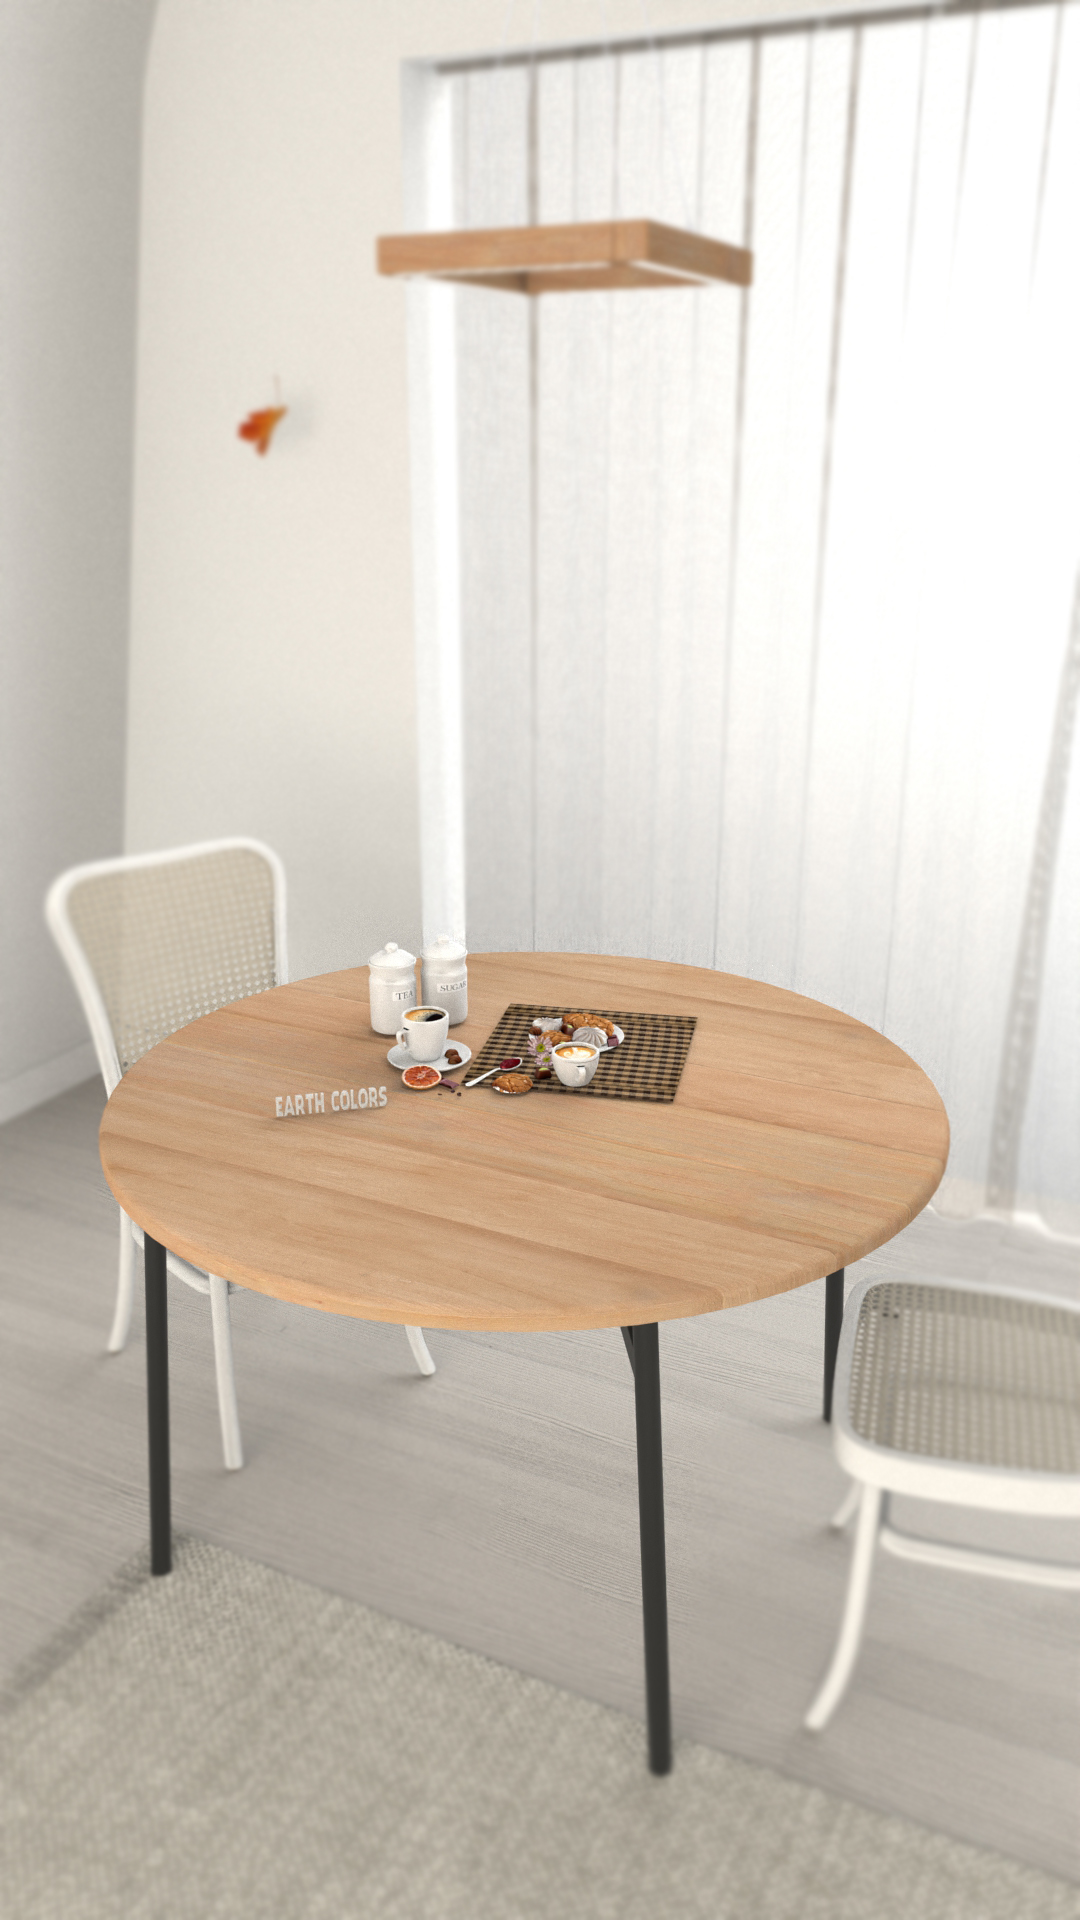 Search for Round kitchen tables just at EARTHCOLORS?